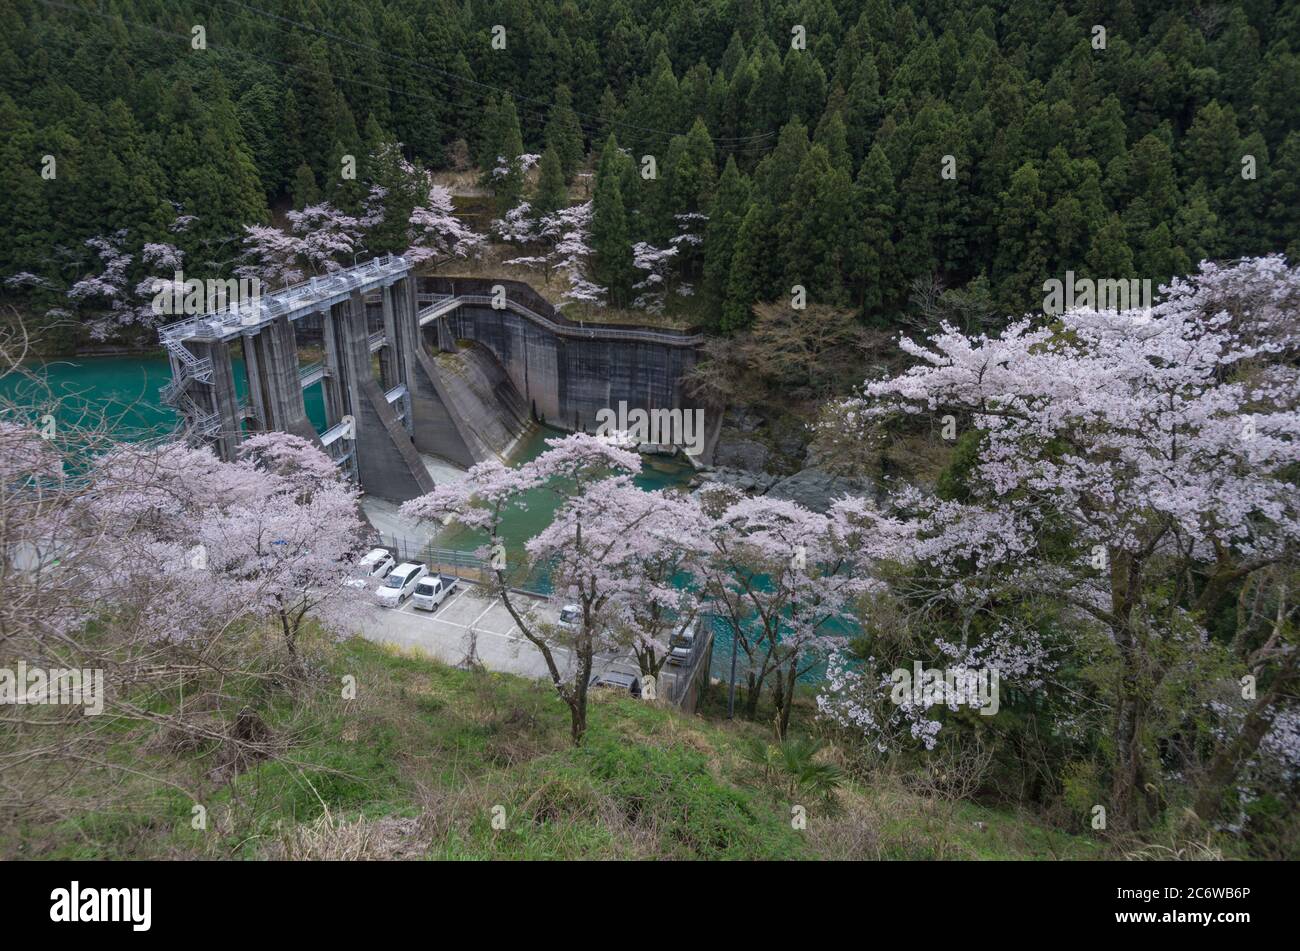 Minawa Dam on the Iya River is a gravity Dam constructed in 1959, here seen during spring surrounded by cherry blossoms, Tokushima, Shikoku, Japan Stock Photo